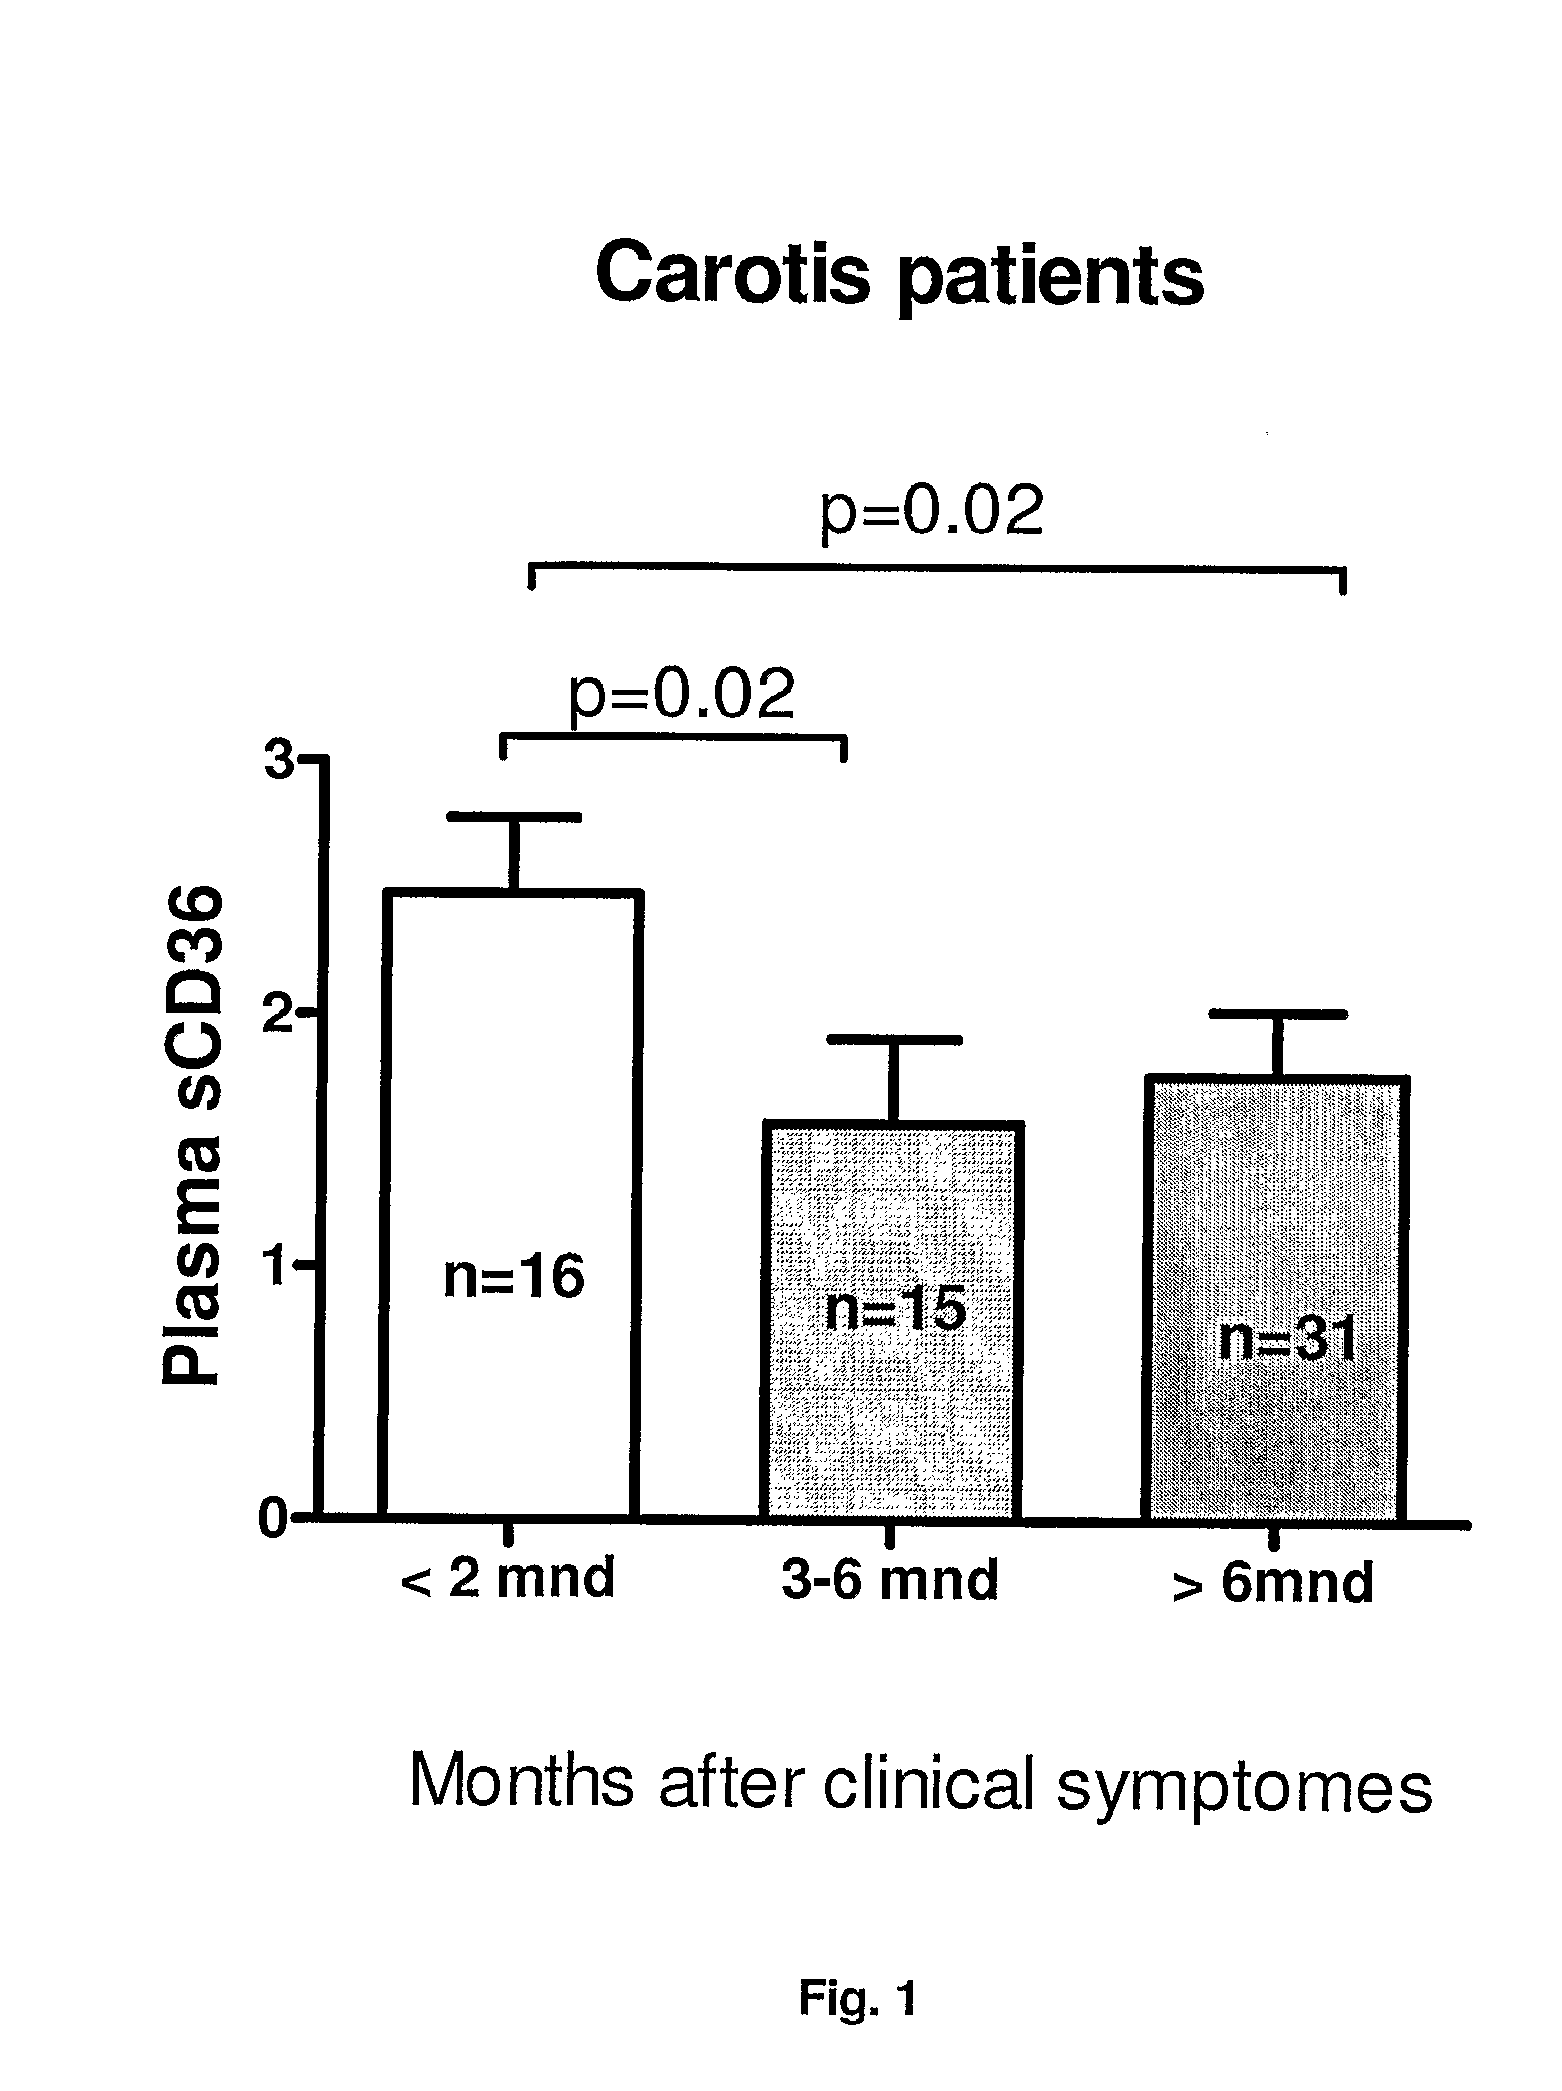 Method for diagnosing atherosclerotic plaques by measurement of cd36